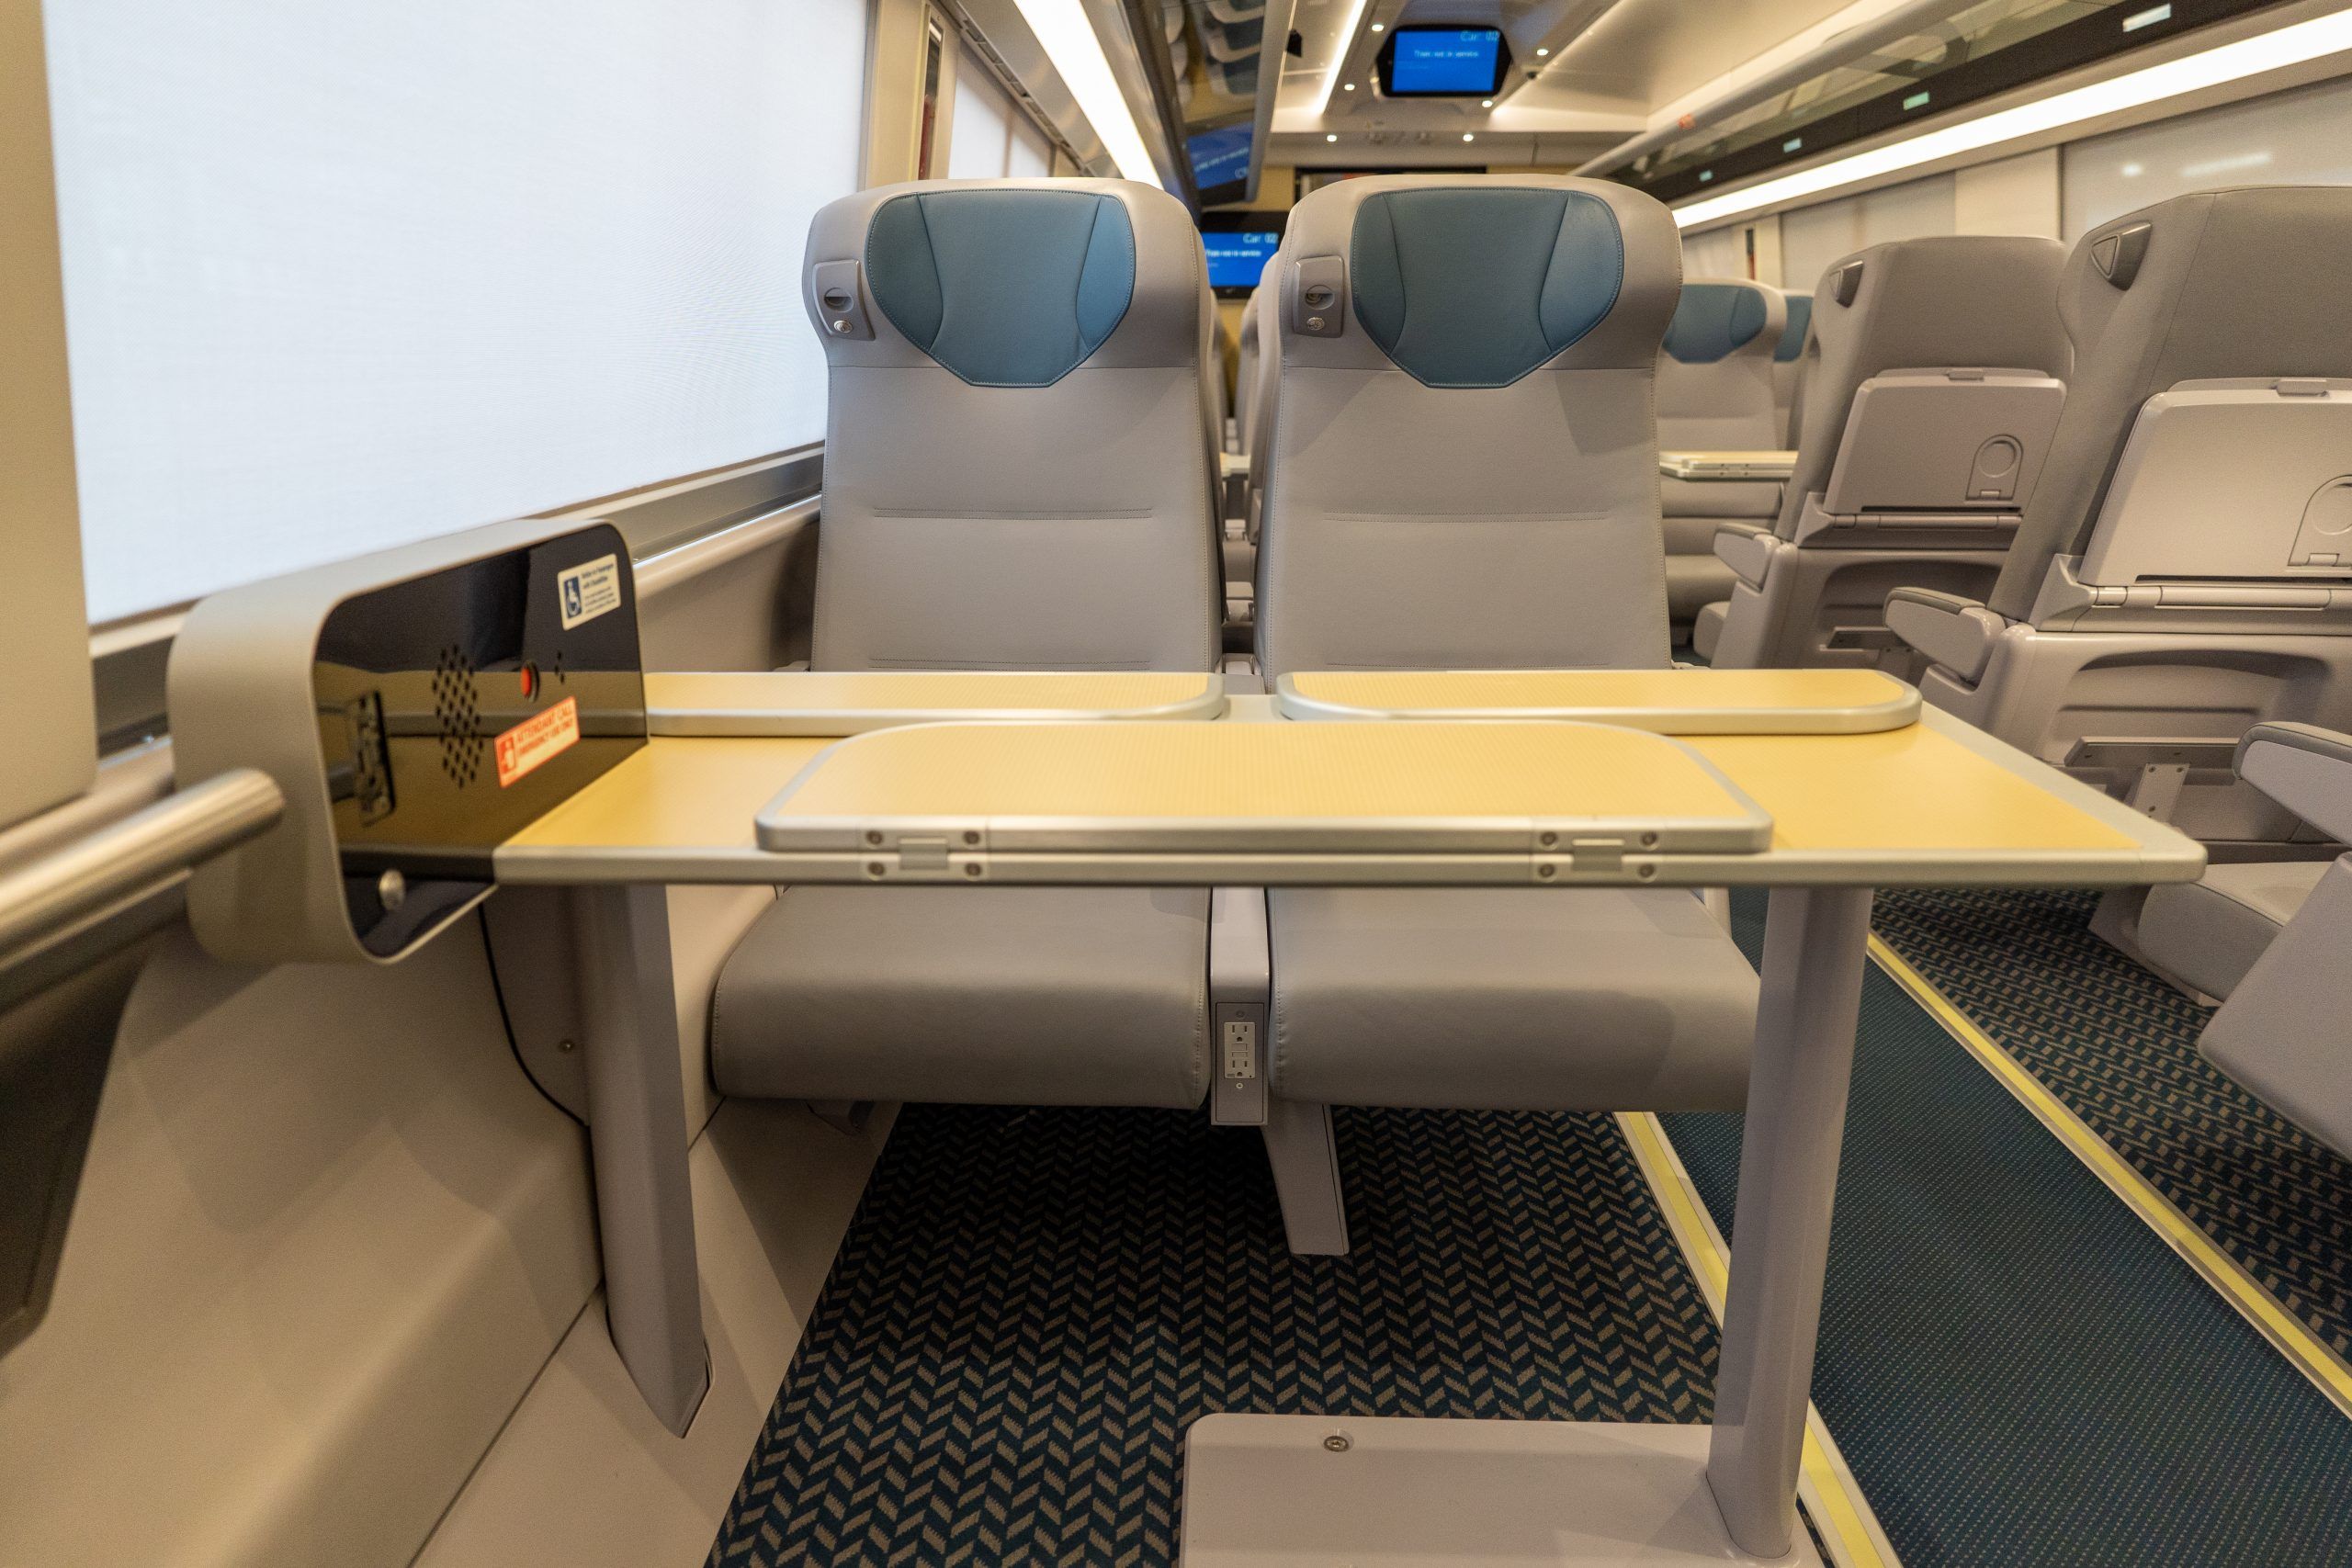 The interior of Acela trainsets unveiled